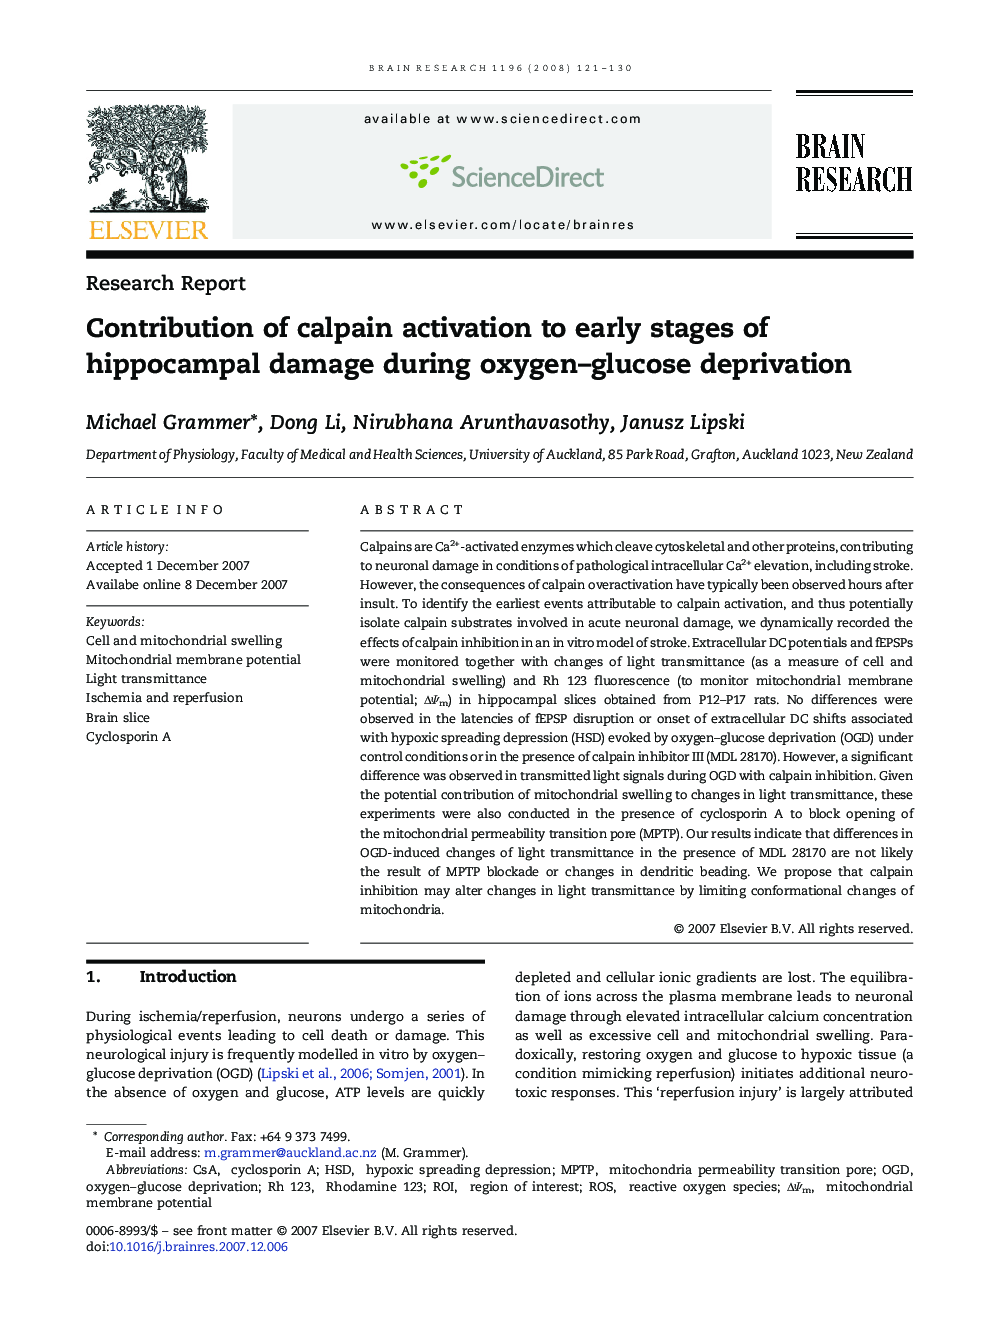 Contribution of calpain activation to early stages of hippocampal damage during oxygen-glucose deprivation